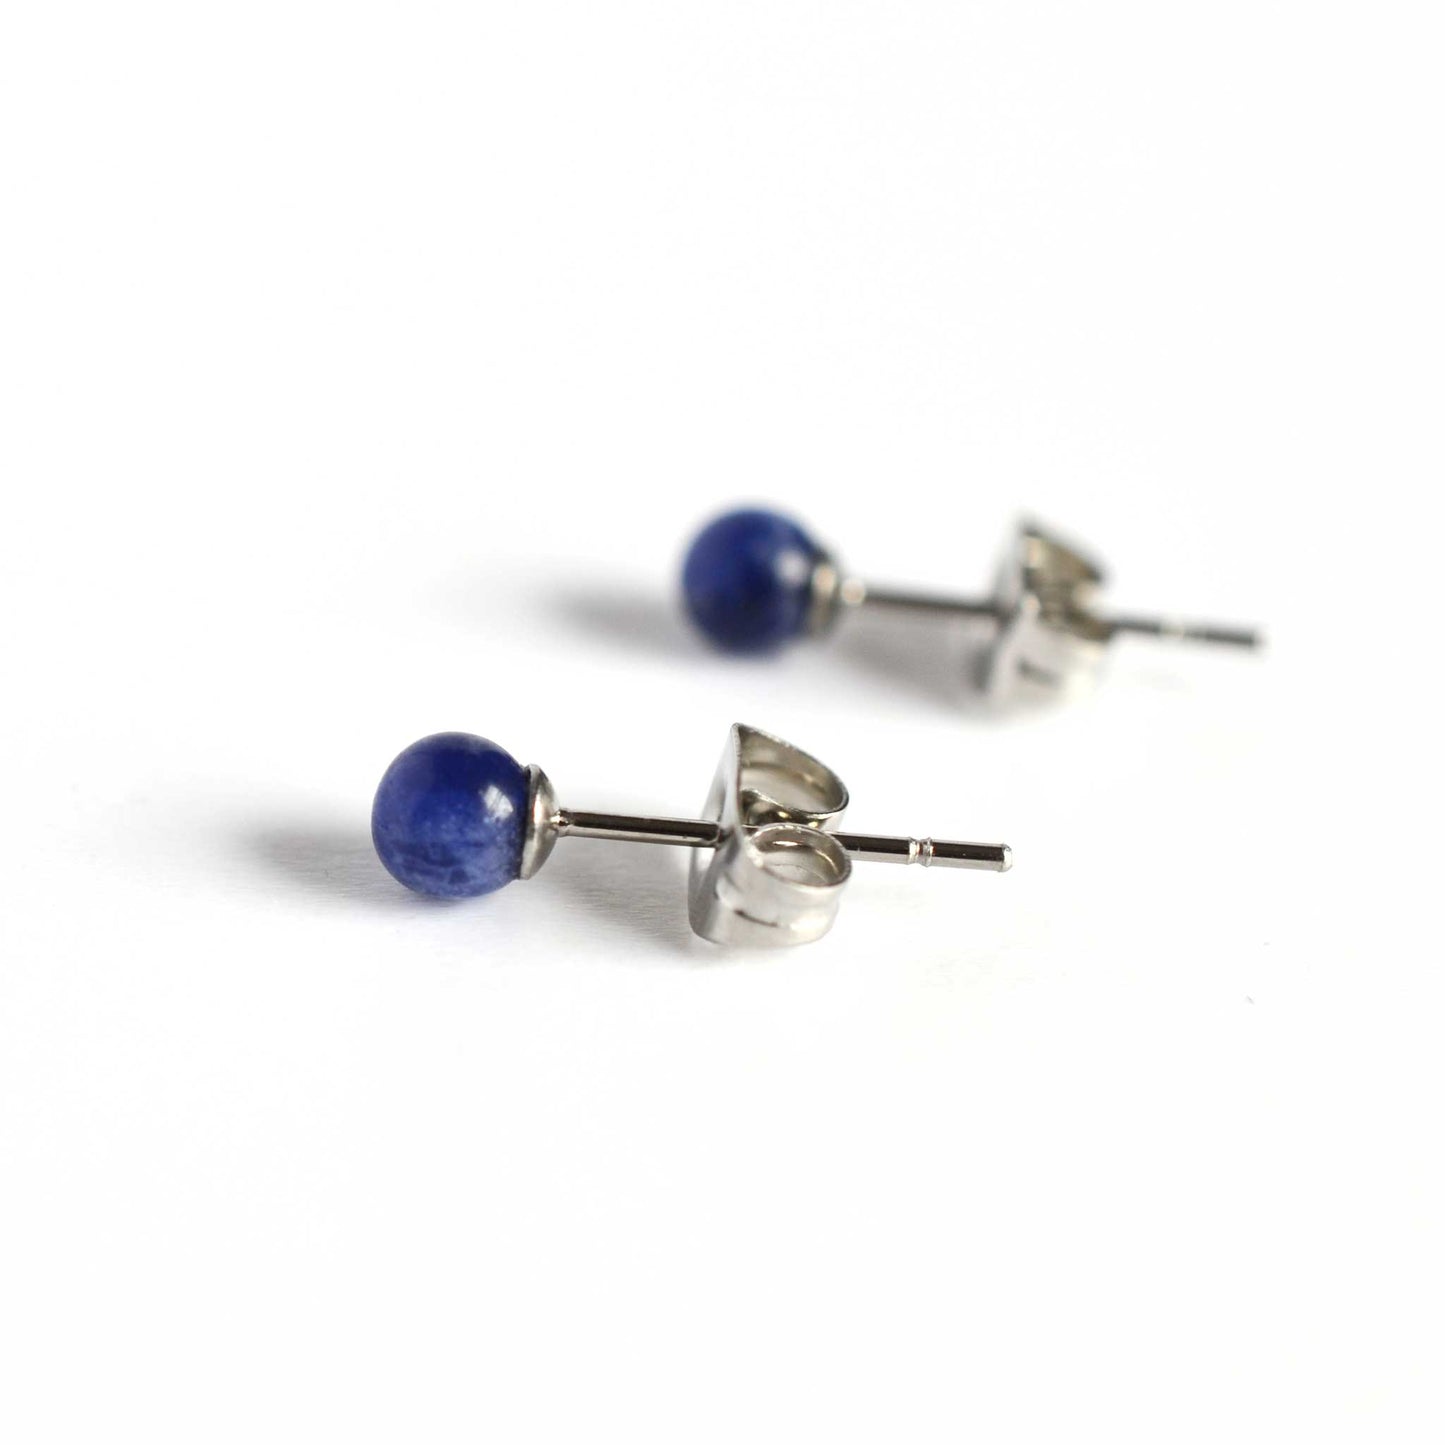 Side view of small blue stud earrings with Sodalite gemstones and surgical steel posts